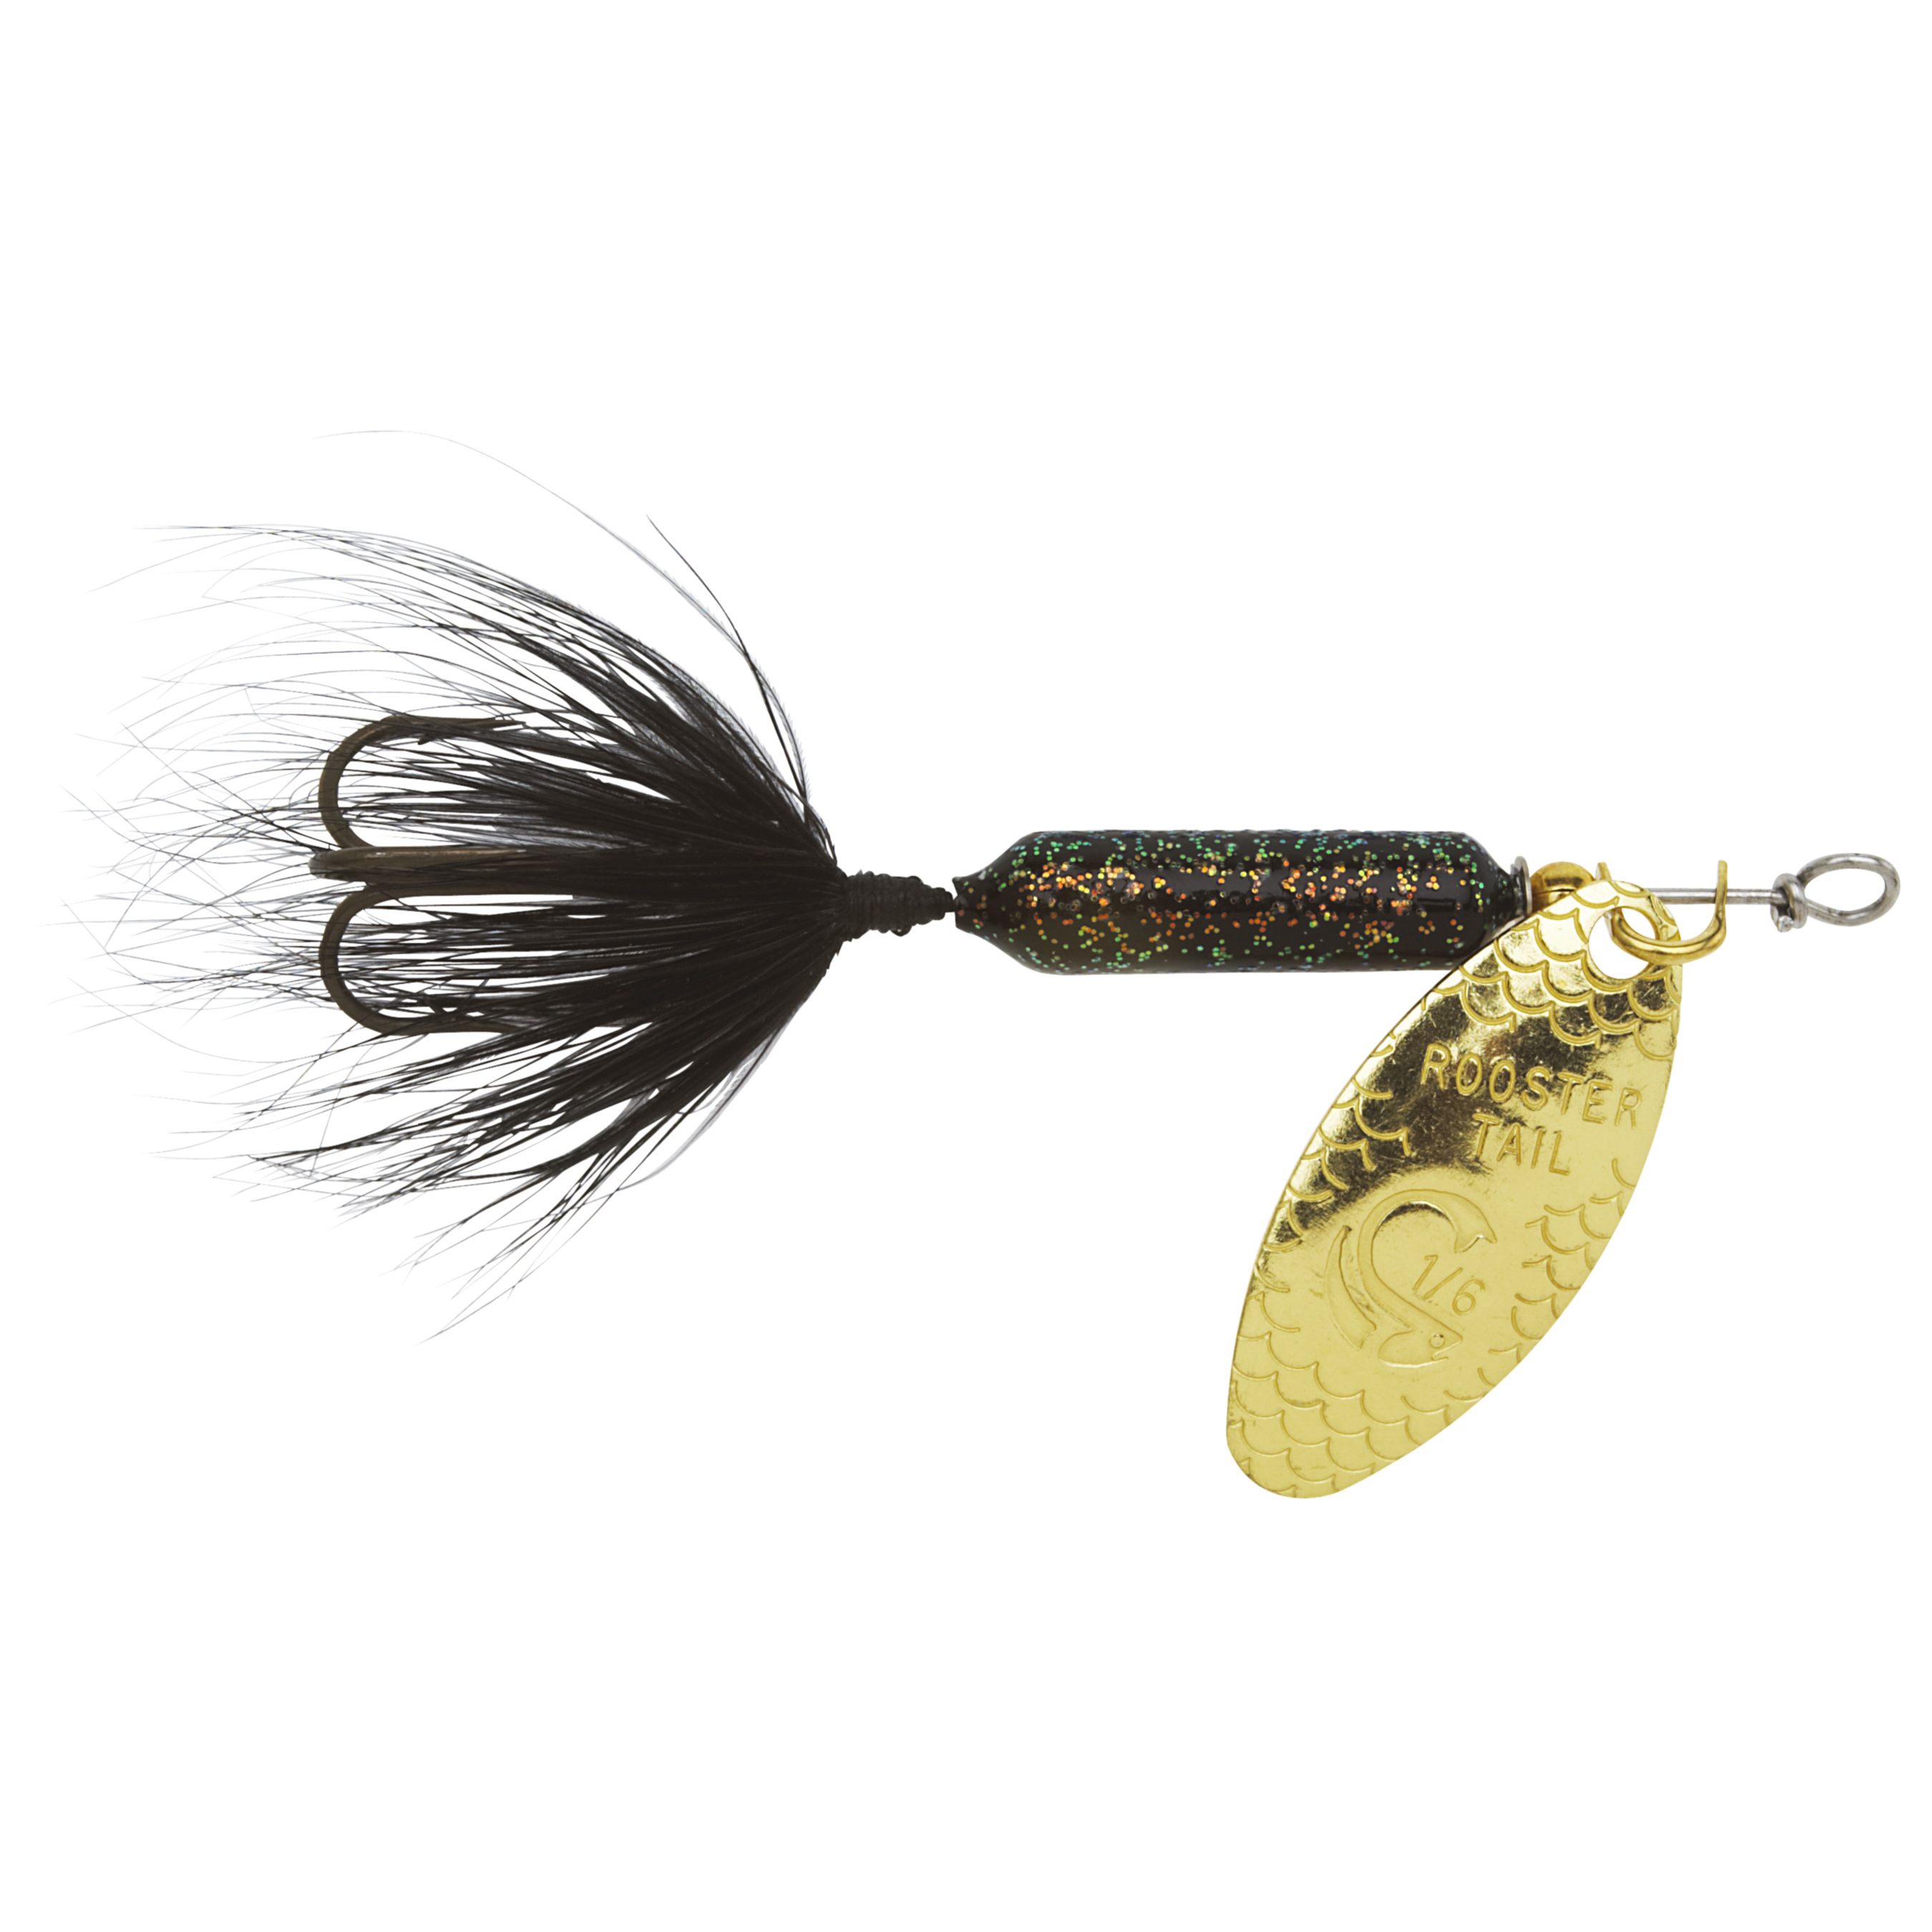 Worden's 208GBL Fishing Lure, Bass, Crappie, Perch, Trout